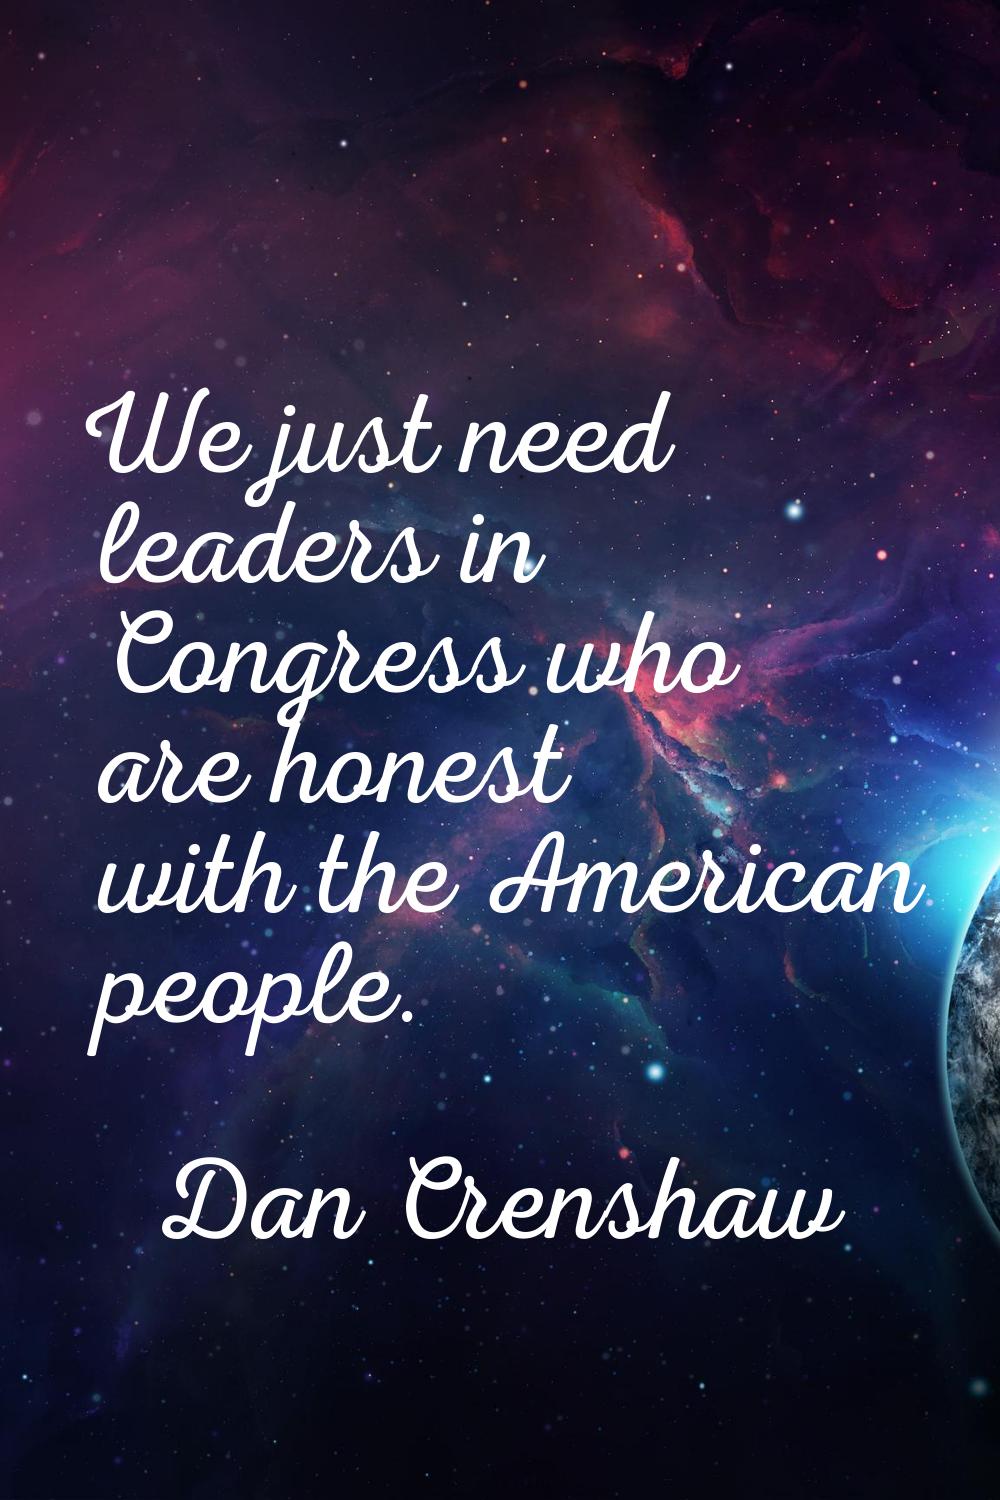 We just need leaders in Congress who are honest with the American people.